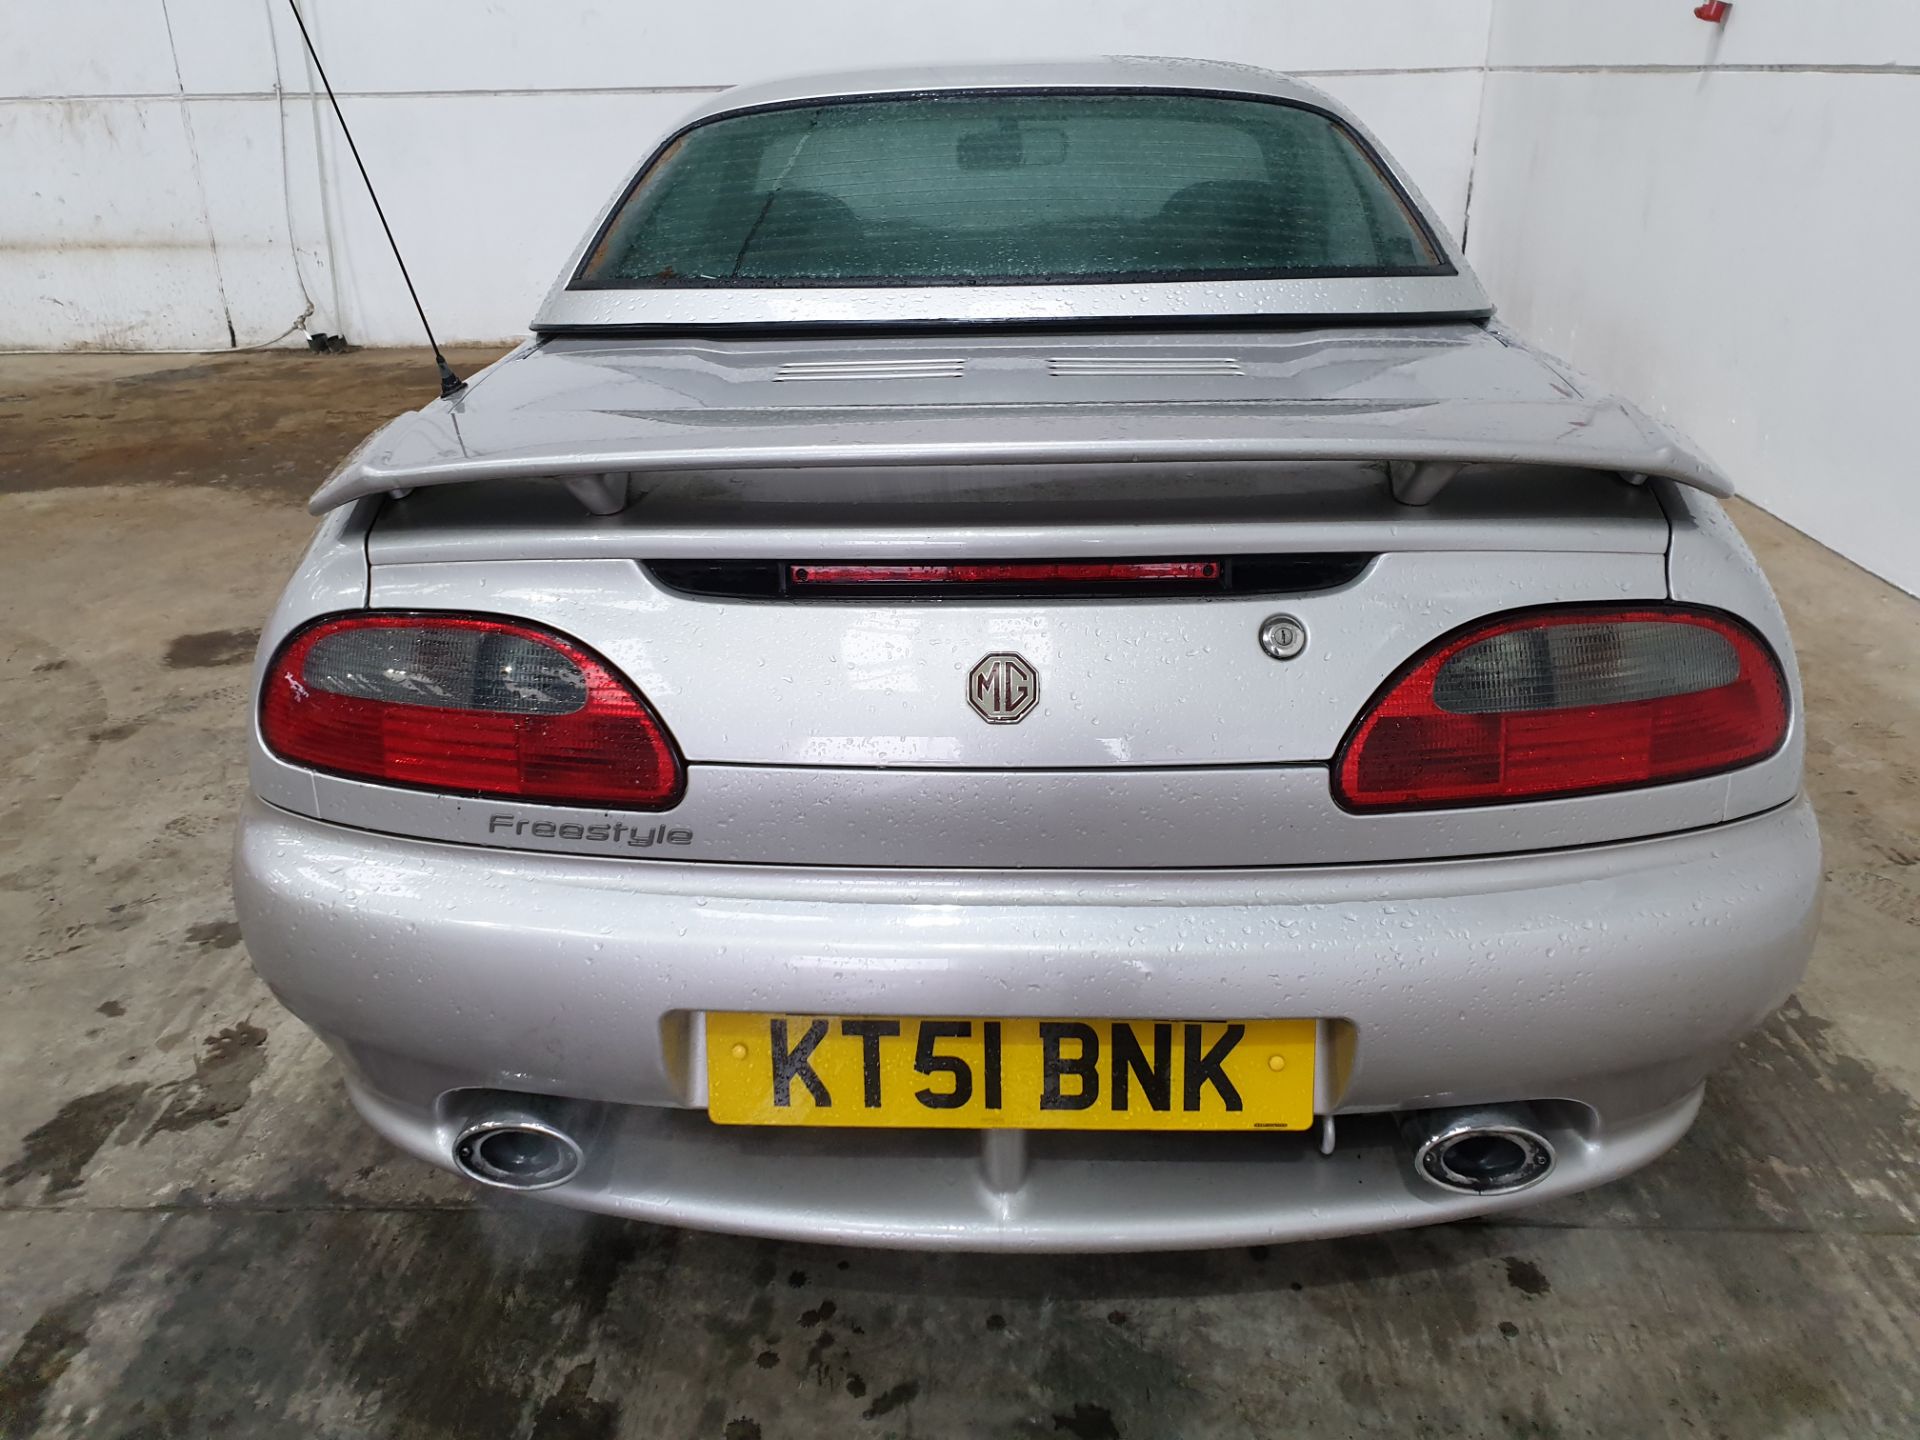 MG MGF Freestyle StepSpeed - Image 4 of 11